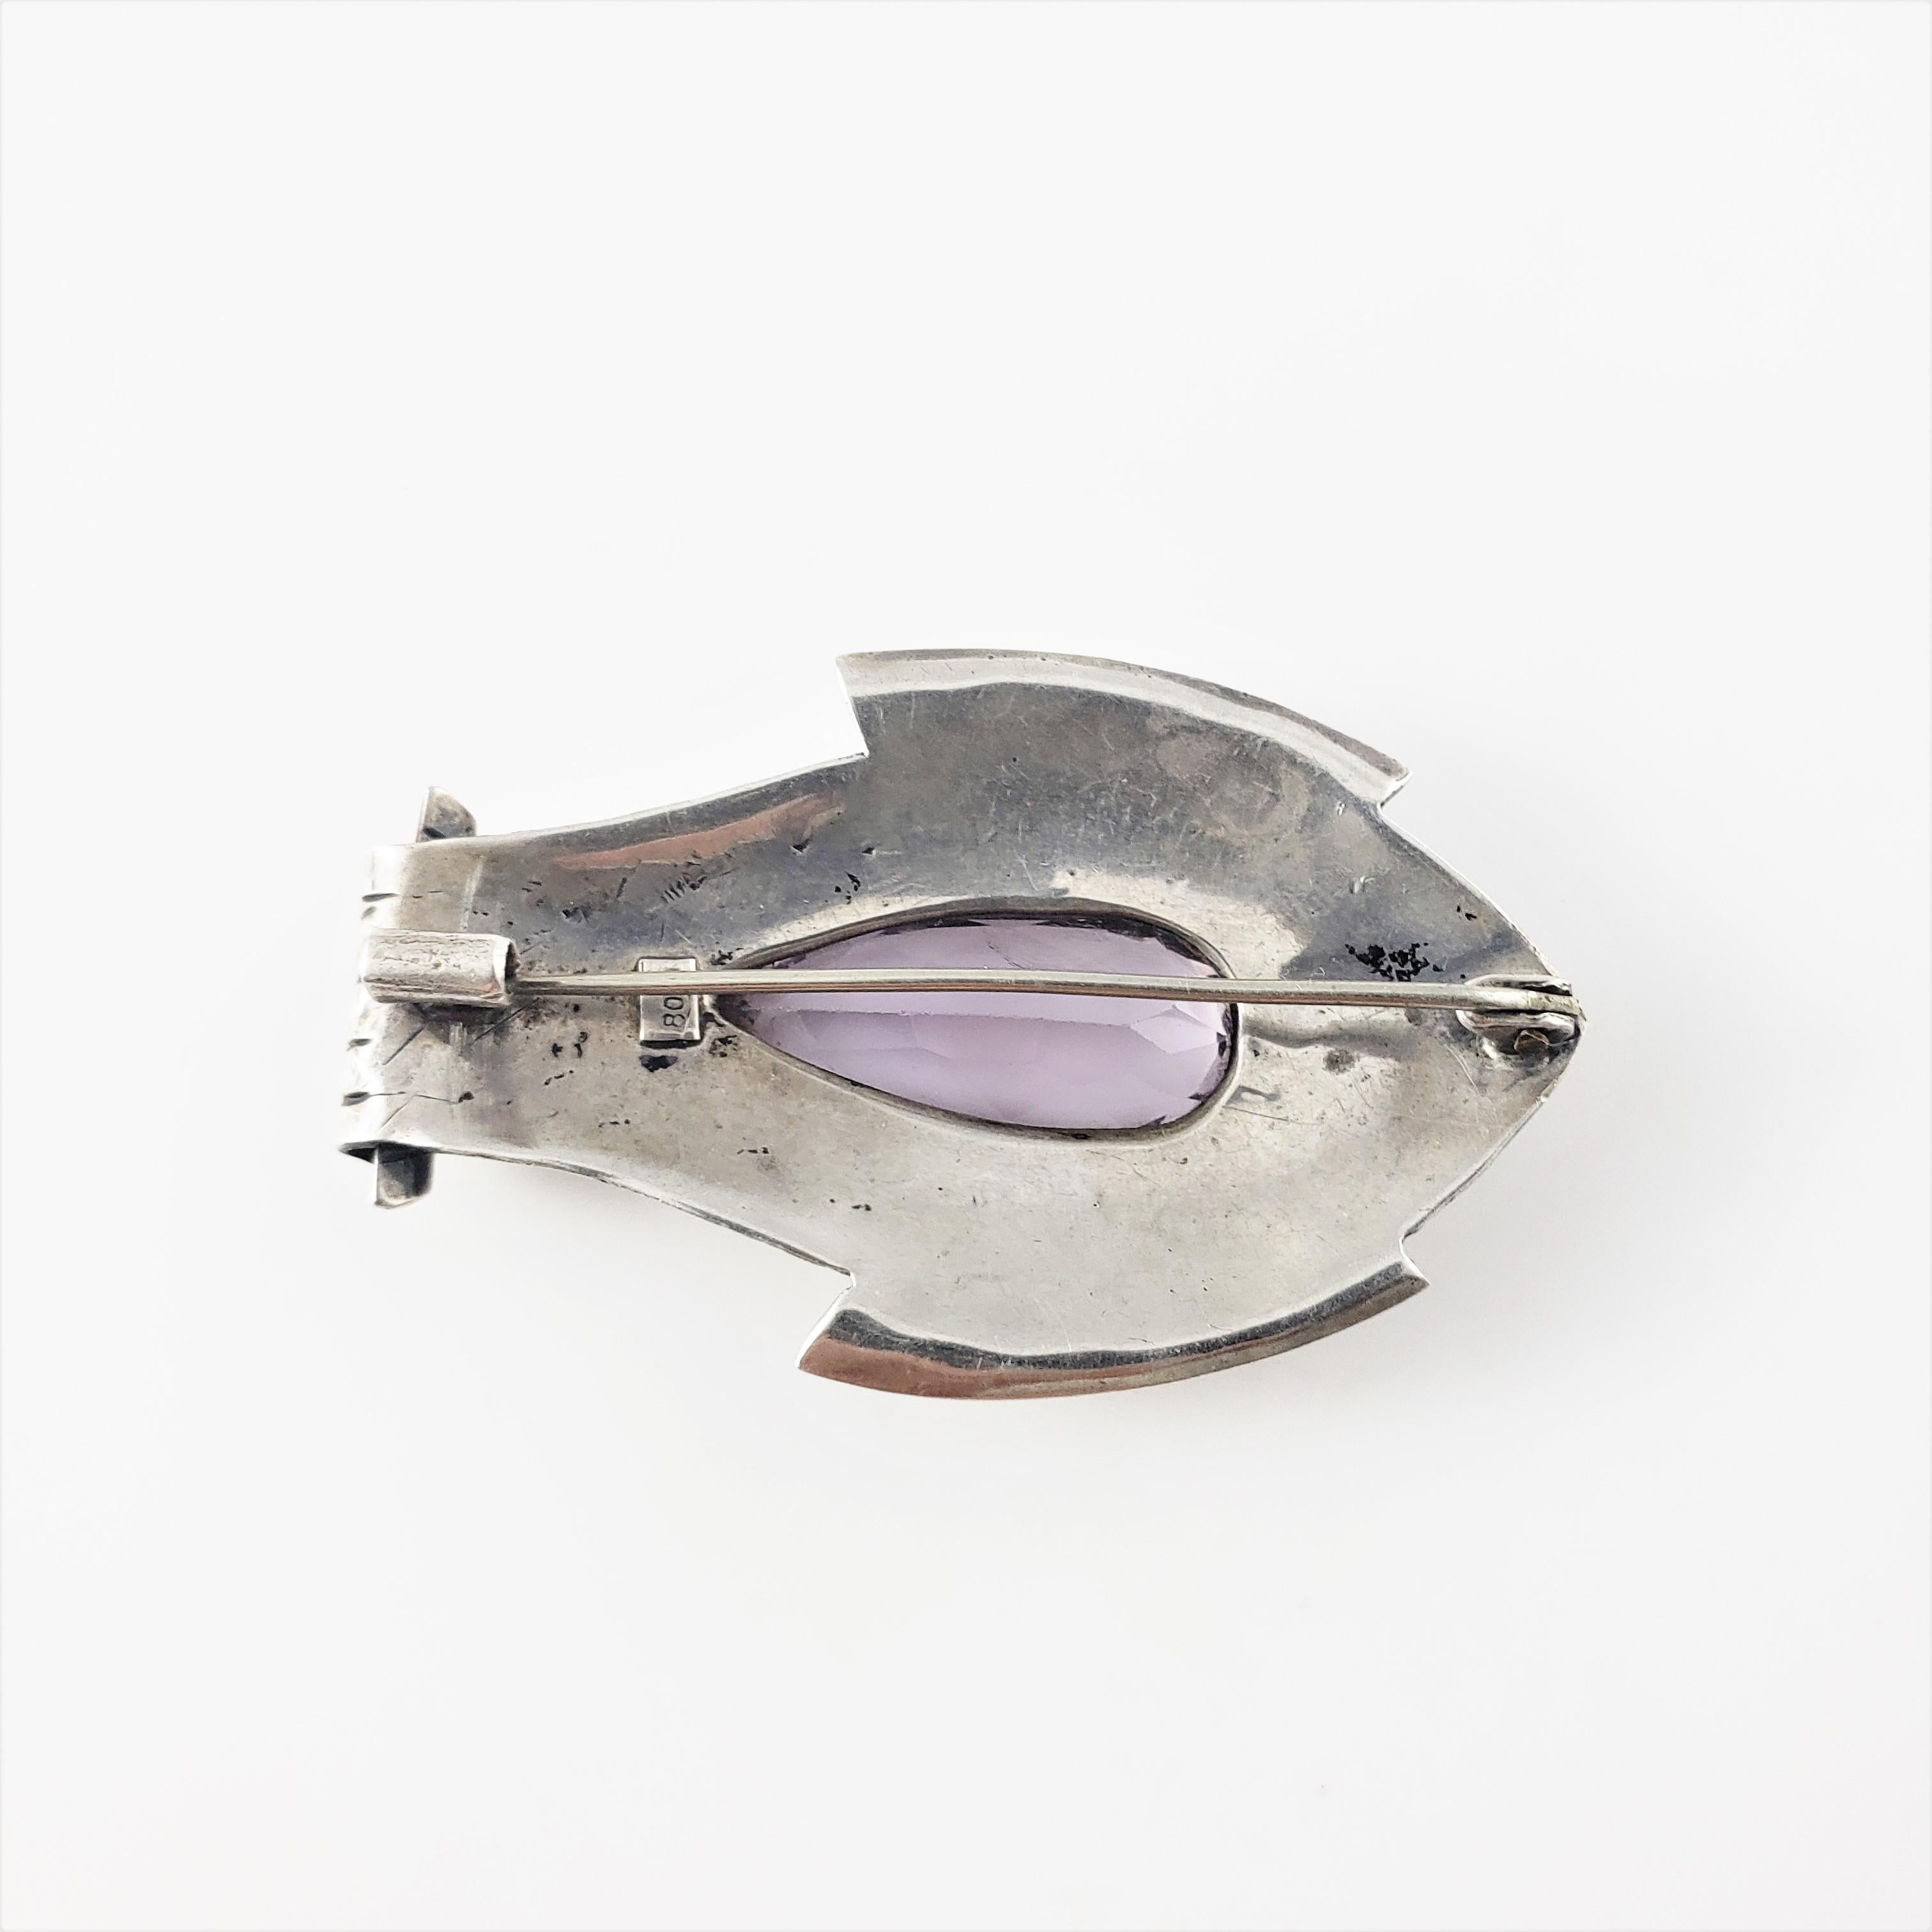 Vintage 800 Silver Fish Amethyst Pin/Pendant-

This lovely piece features a beautifully detailed fish decorated with a pear shaped amethyst stone (24 mm x 11 mm).

Size: 2